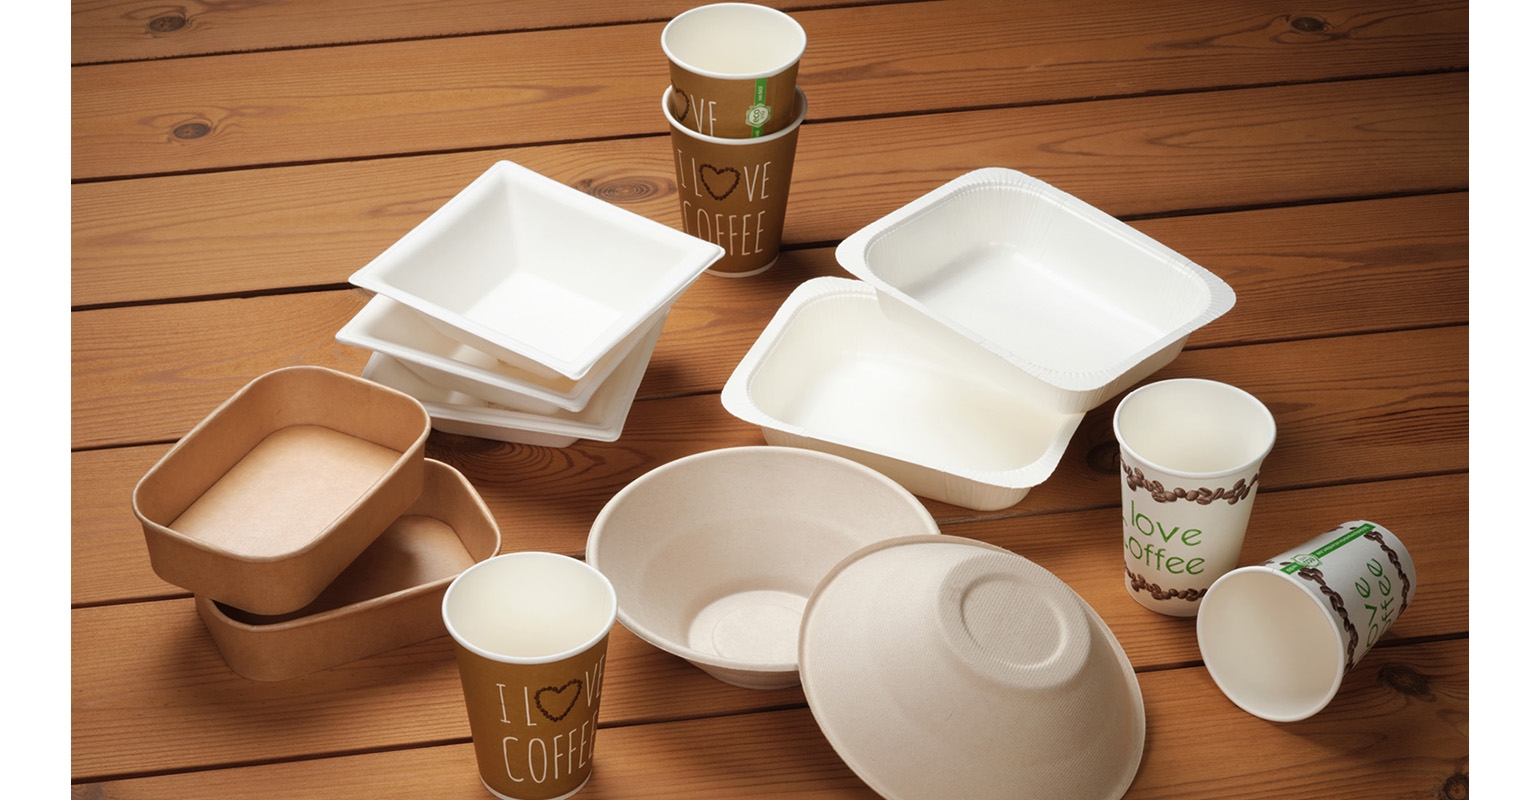 Are Styrofoam Cups, Plates, and Bowls Recyclable?, News